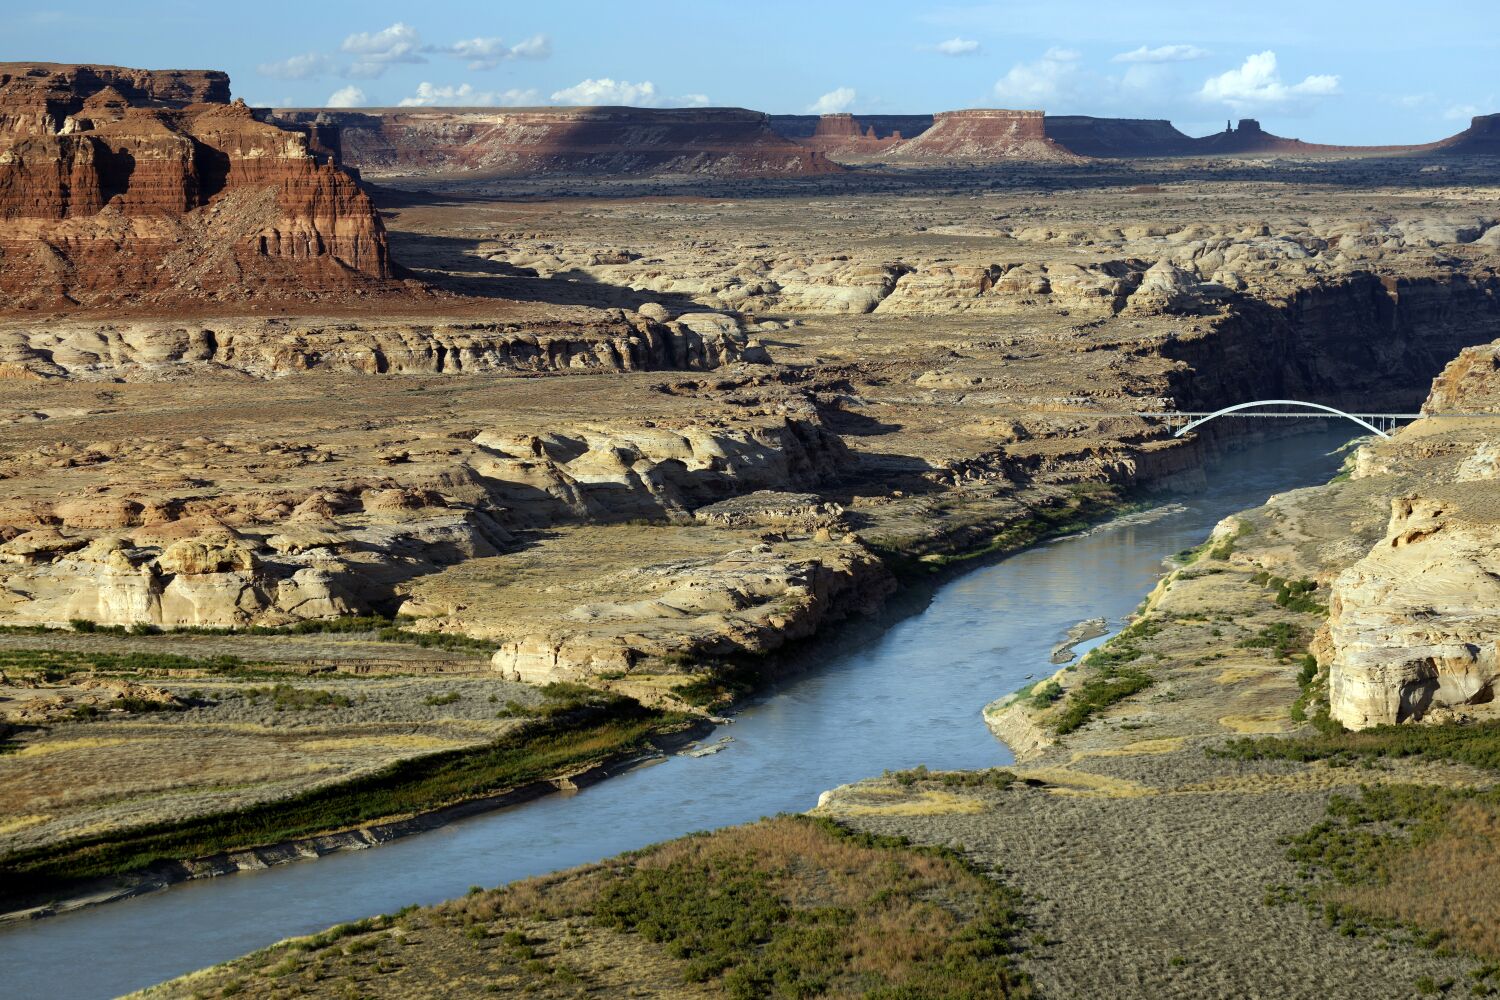 California offers proposal on Colorado River crisis, disagreeing with six states